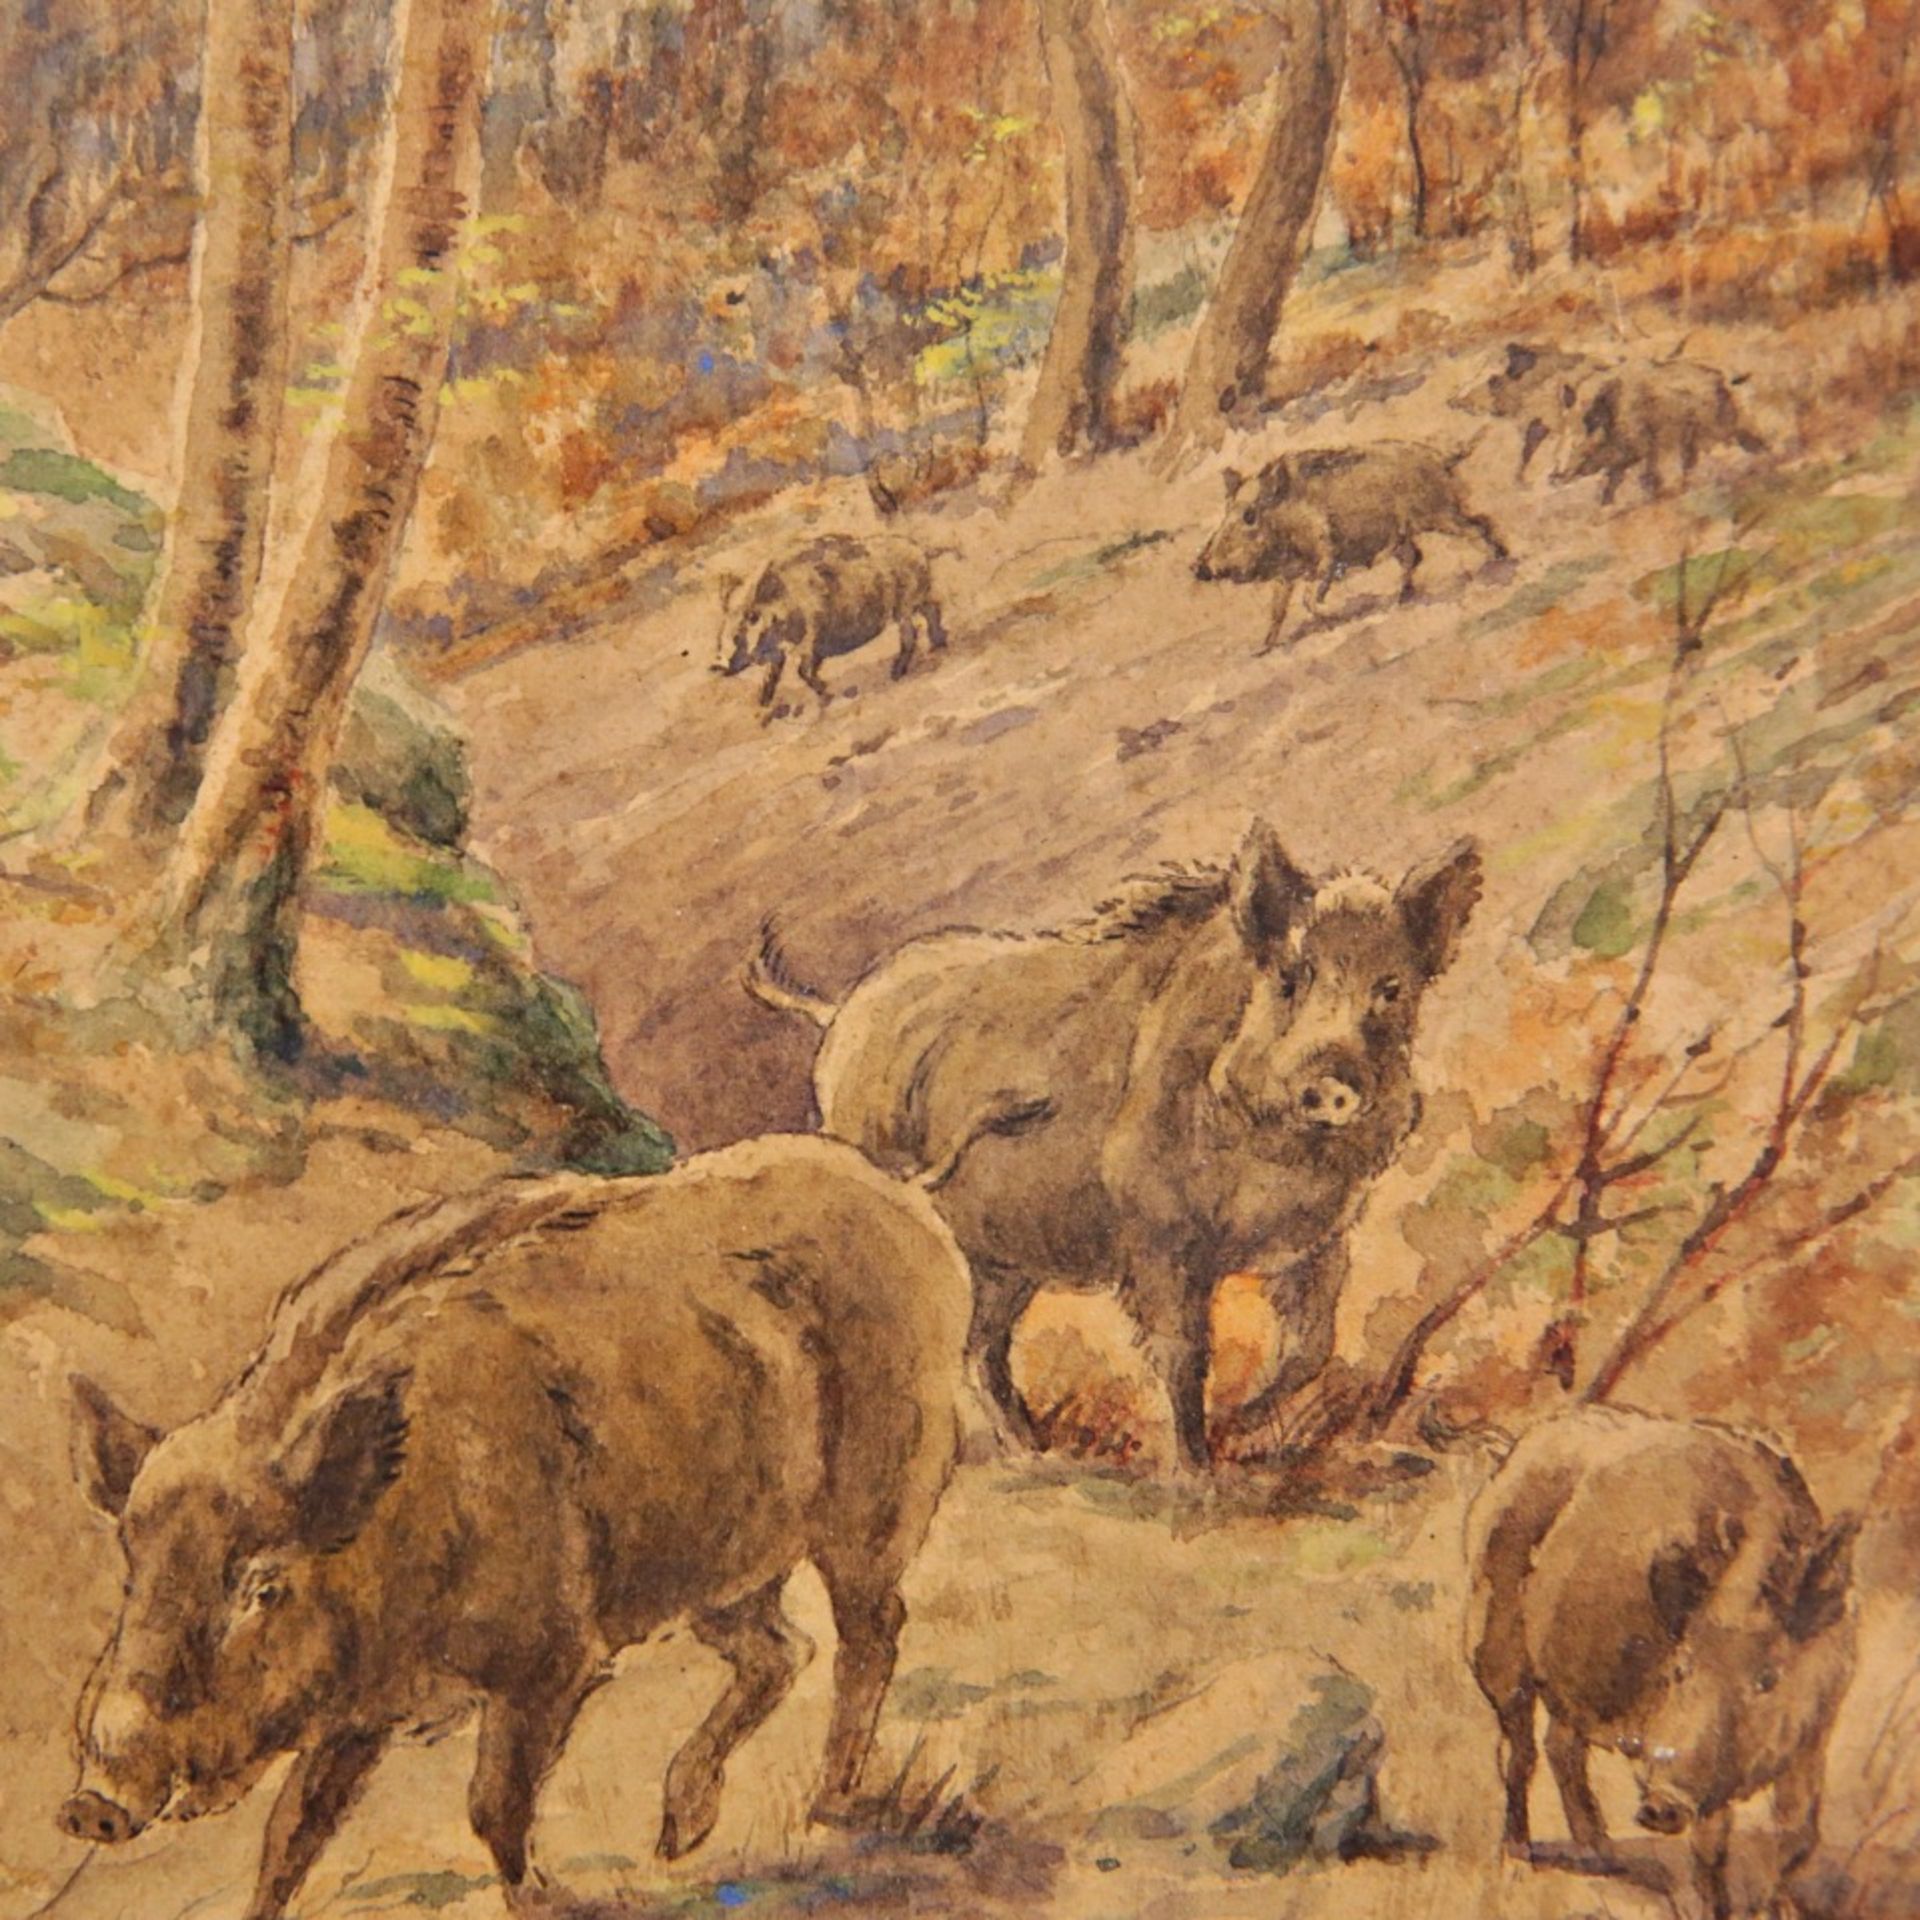 Paul COLAS (1902-?) "The wild boars" watercolor on paper, French painting of the 20th century. - Image 3 of 4